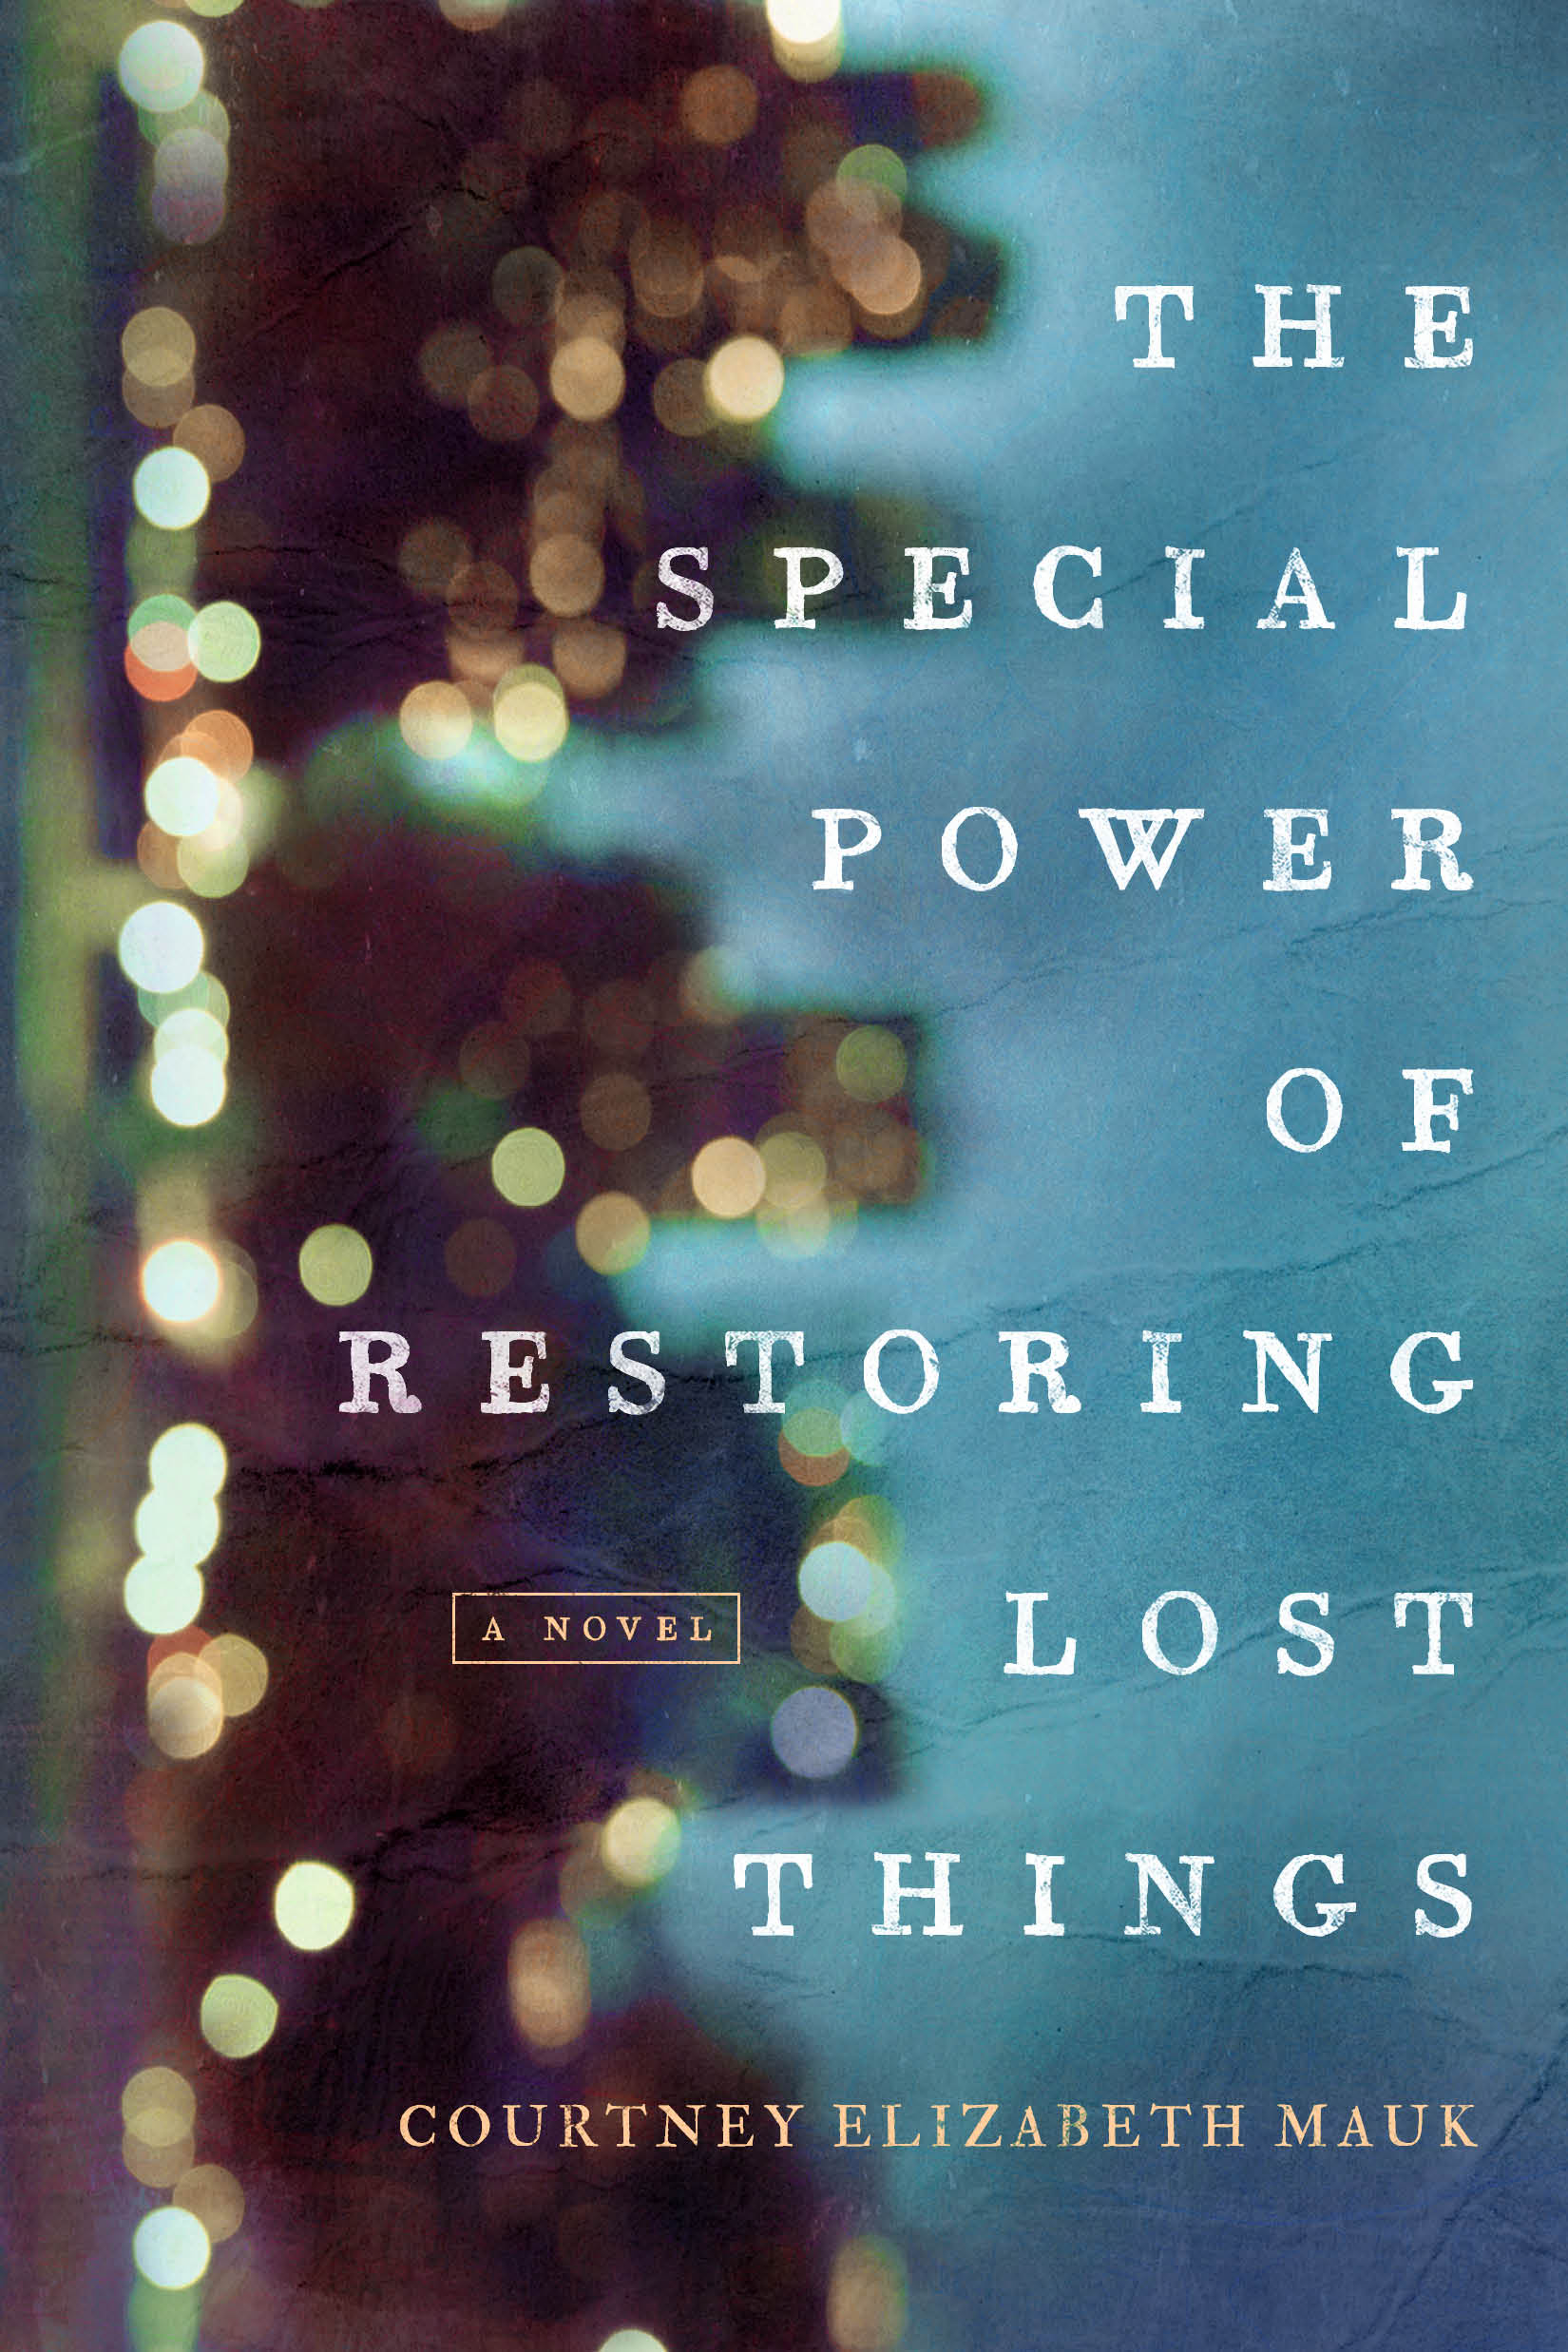  Set against a layered Manhattan landscape,&nbsp; The Special Power of Restoring Lost Things &nbsp;explores a fractured family through the alternating perspectives of the mother, father, and brother of a young woman during the aftermath of her disapp